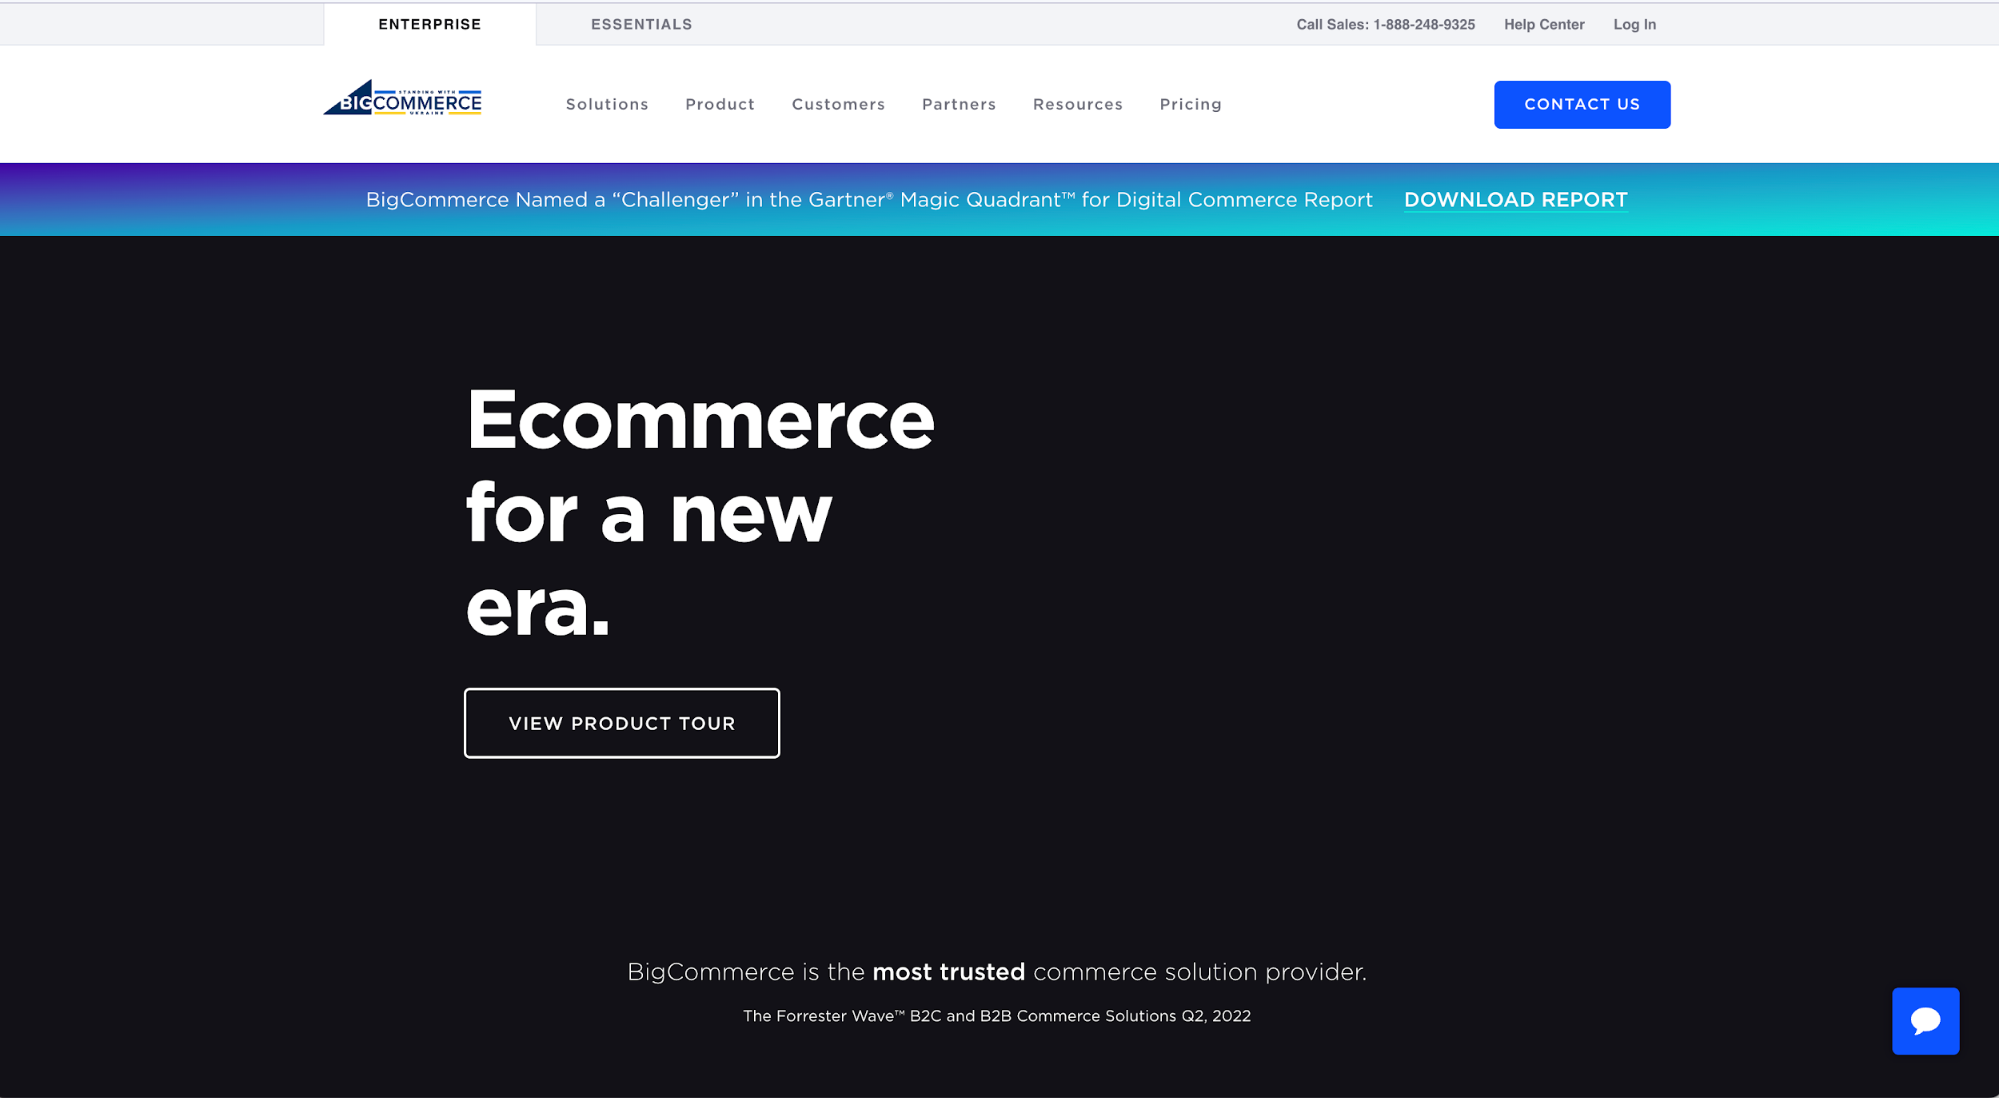 BigCommerce logo and navigation bar above a minimalist black homepage with button to tour product.